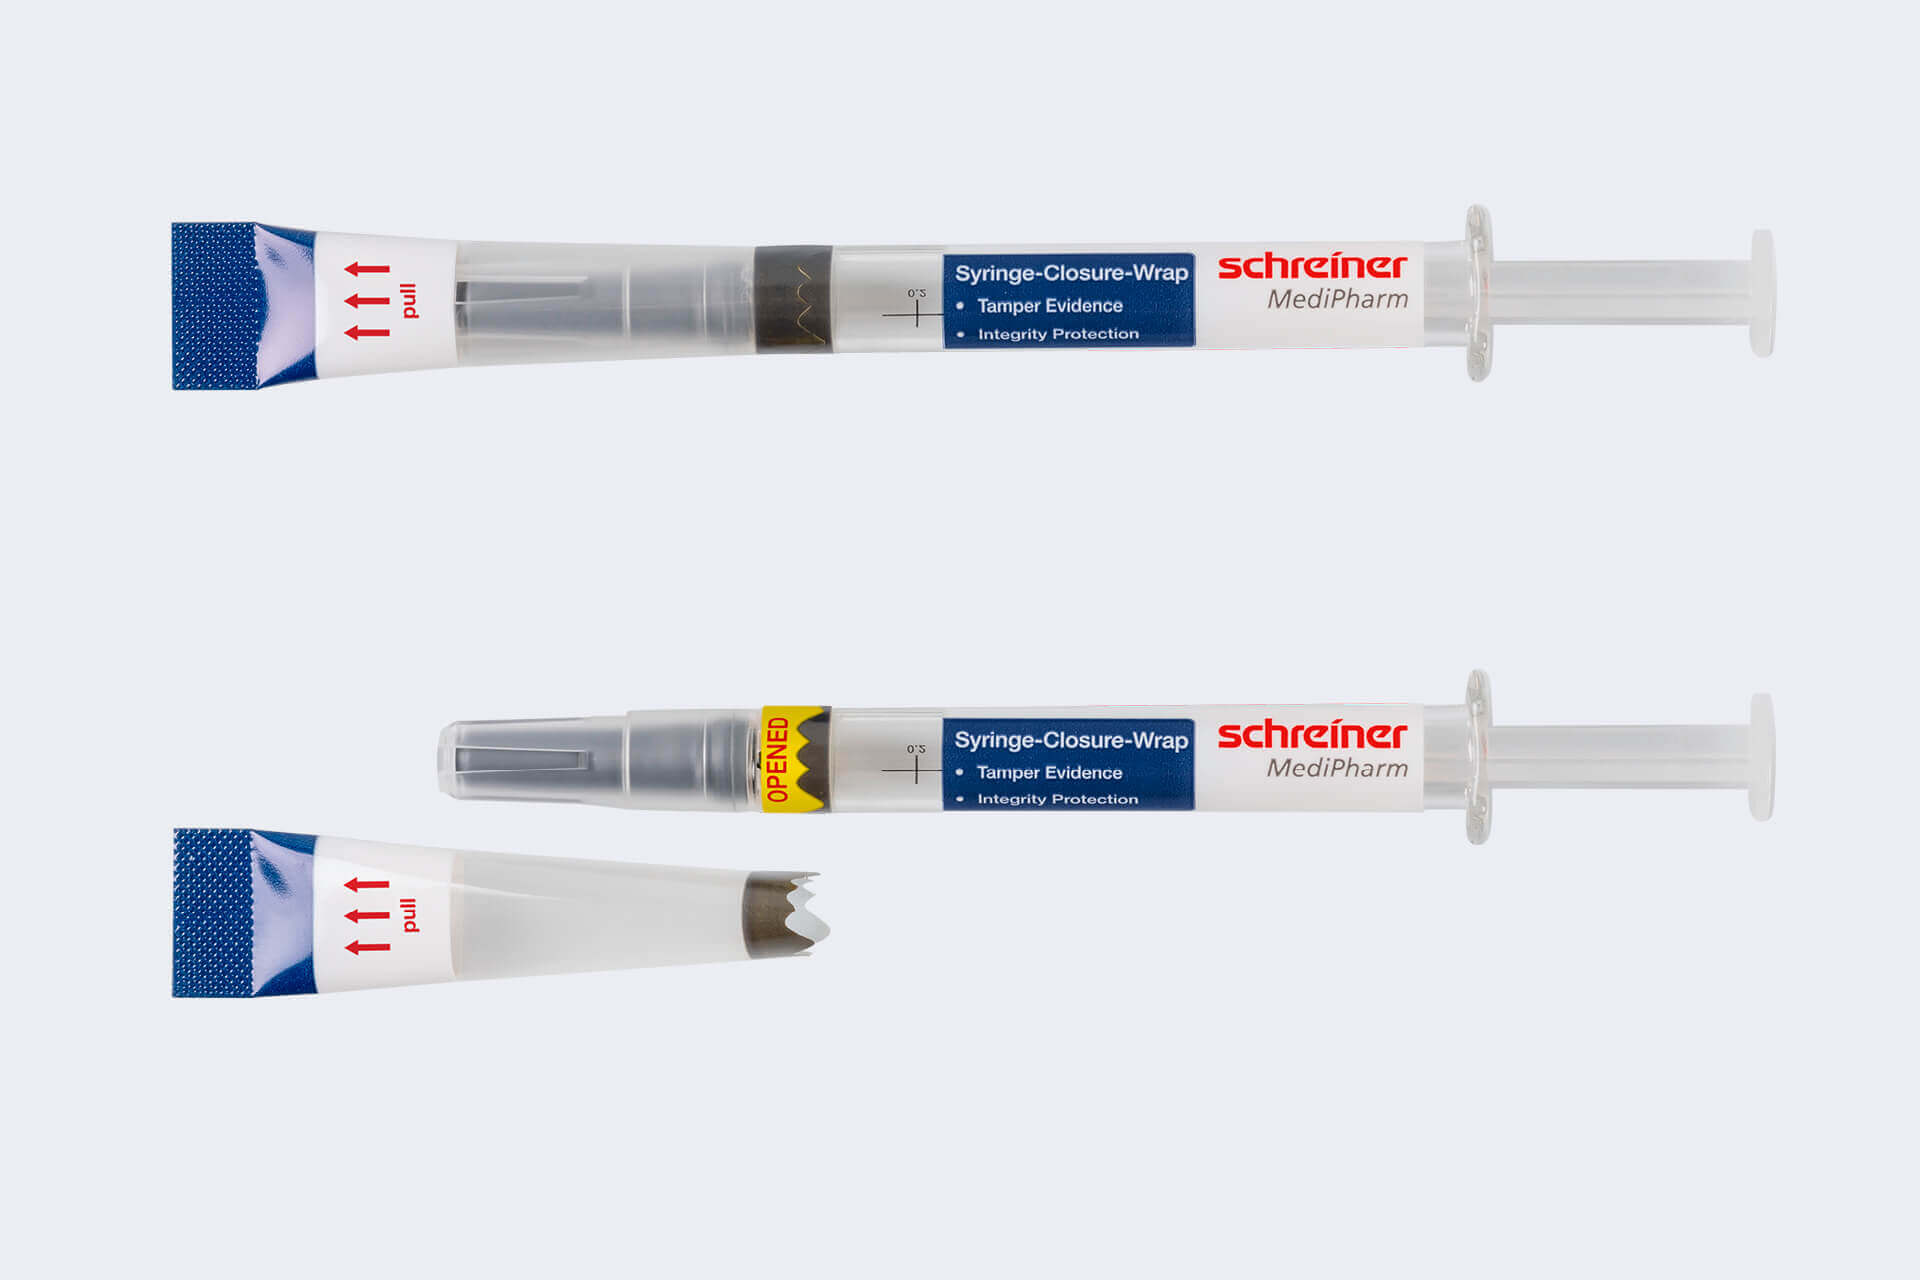 Syringe-Closure-Wrap protects the integrity of the syringe and irreversibly indicates its first opening.